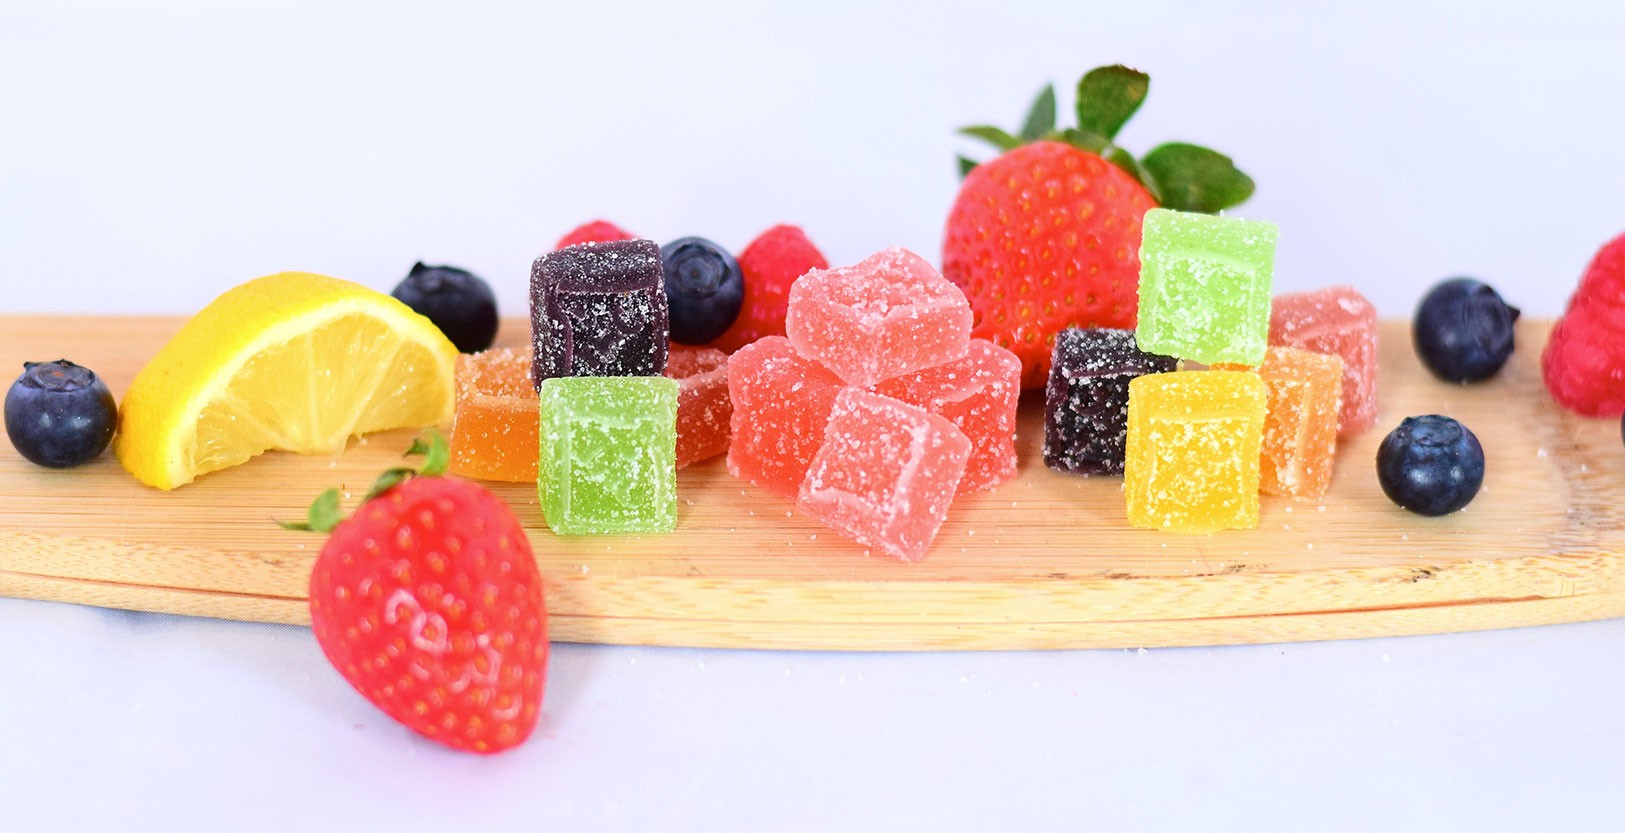 Assorted cannabis-infused gummies, showcasing colorful and flavorful edibles for beginners exploring cannabis-infused treats